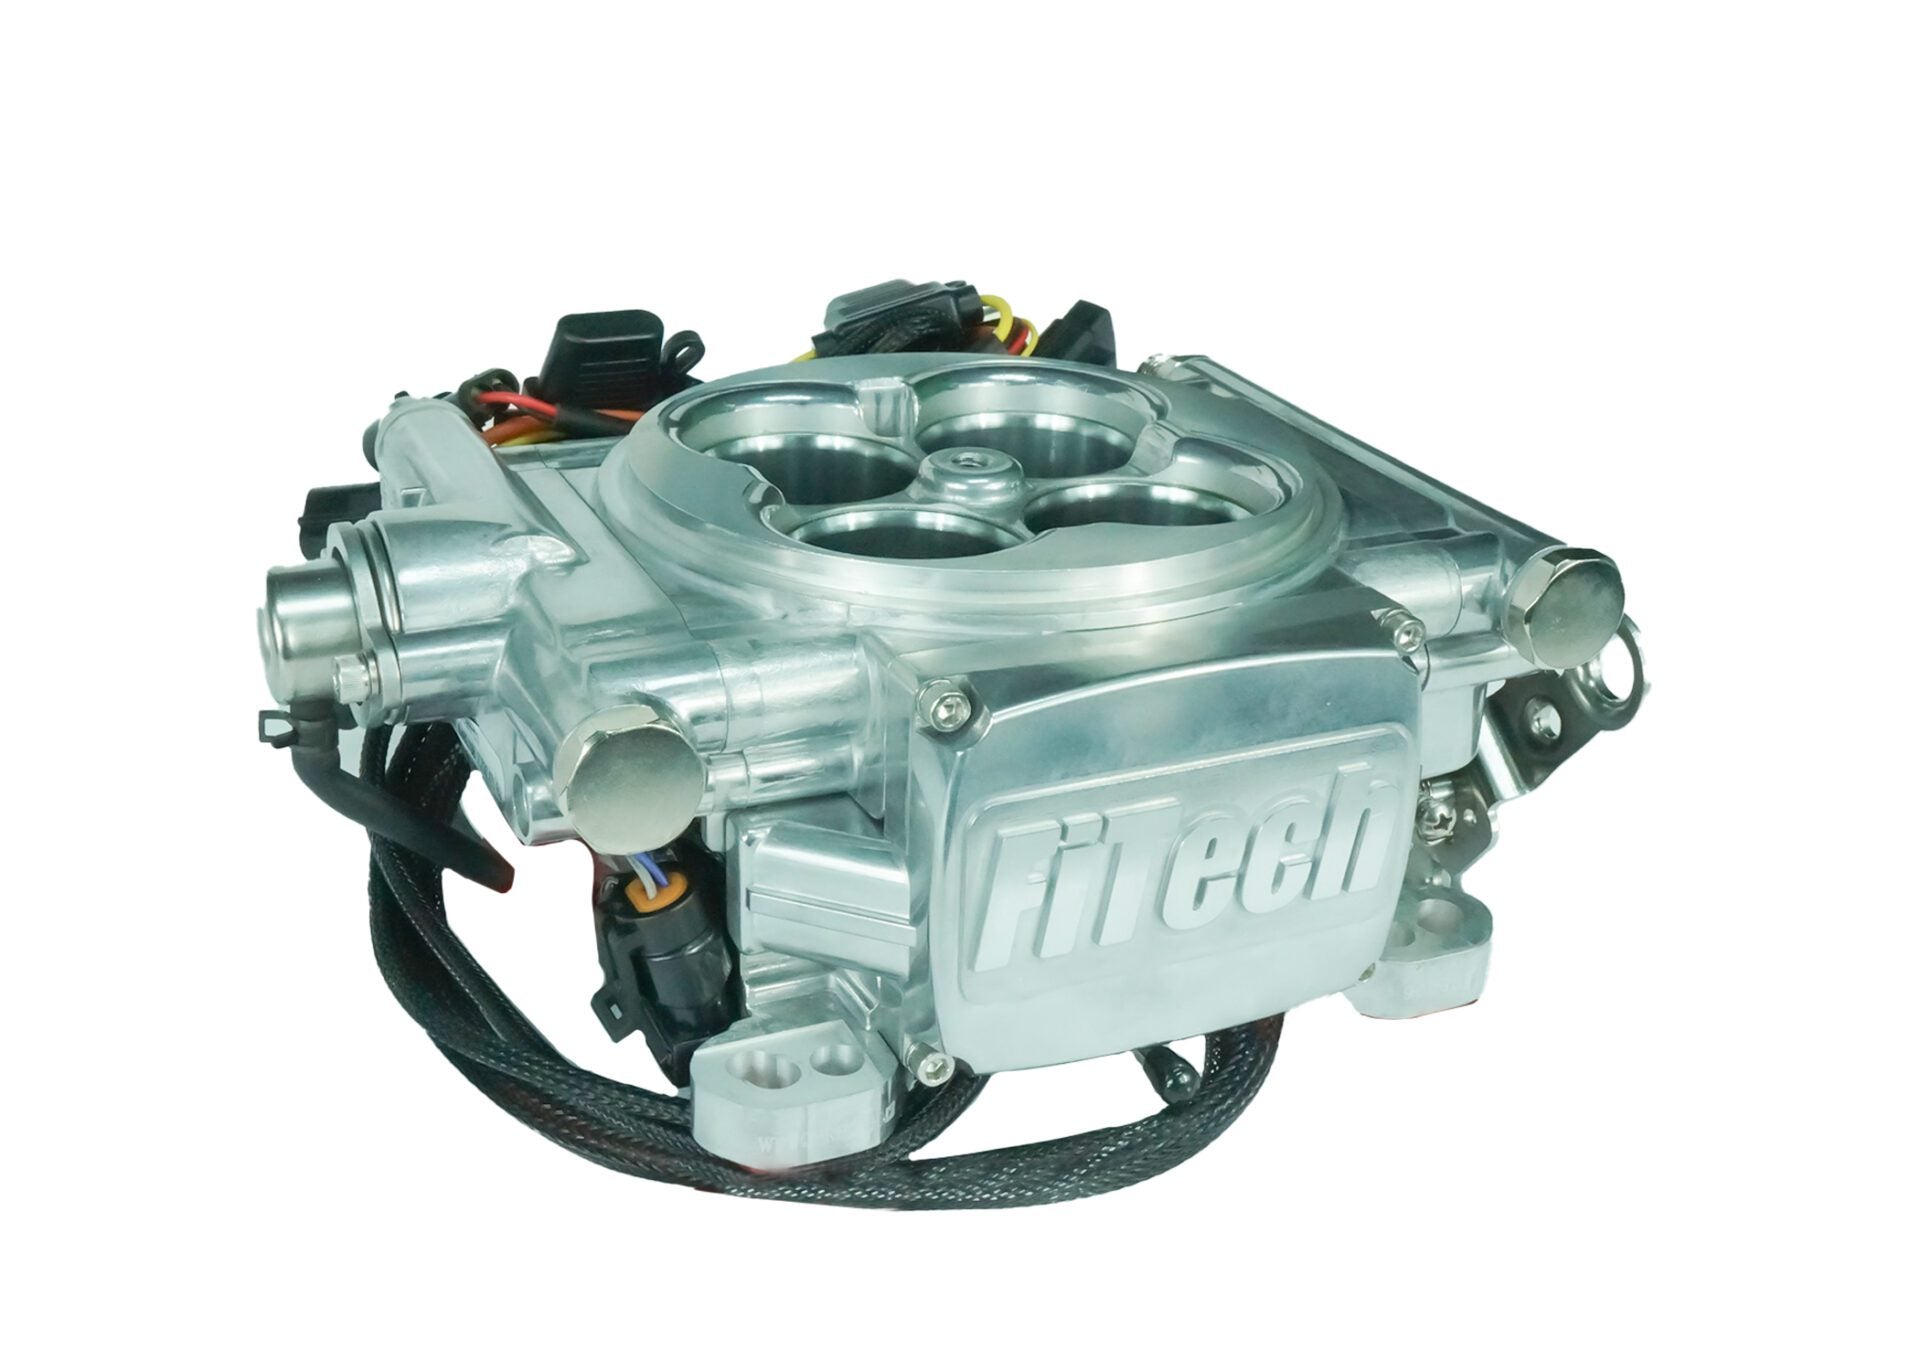 FiTech 93506 Go EFI 4 600 HP Power Adder Bright Alum EFI System w/ Force Fuel Delivery Master